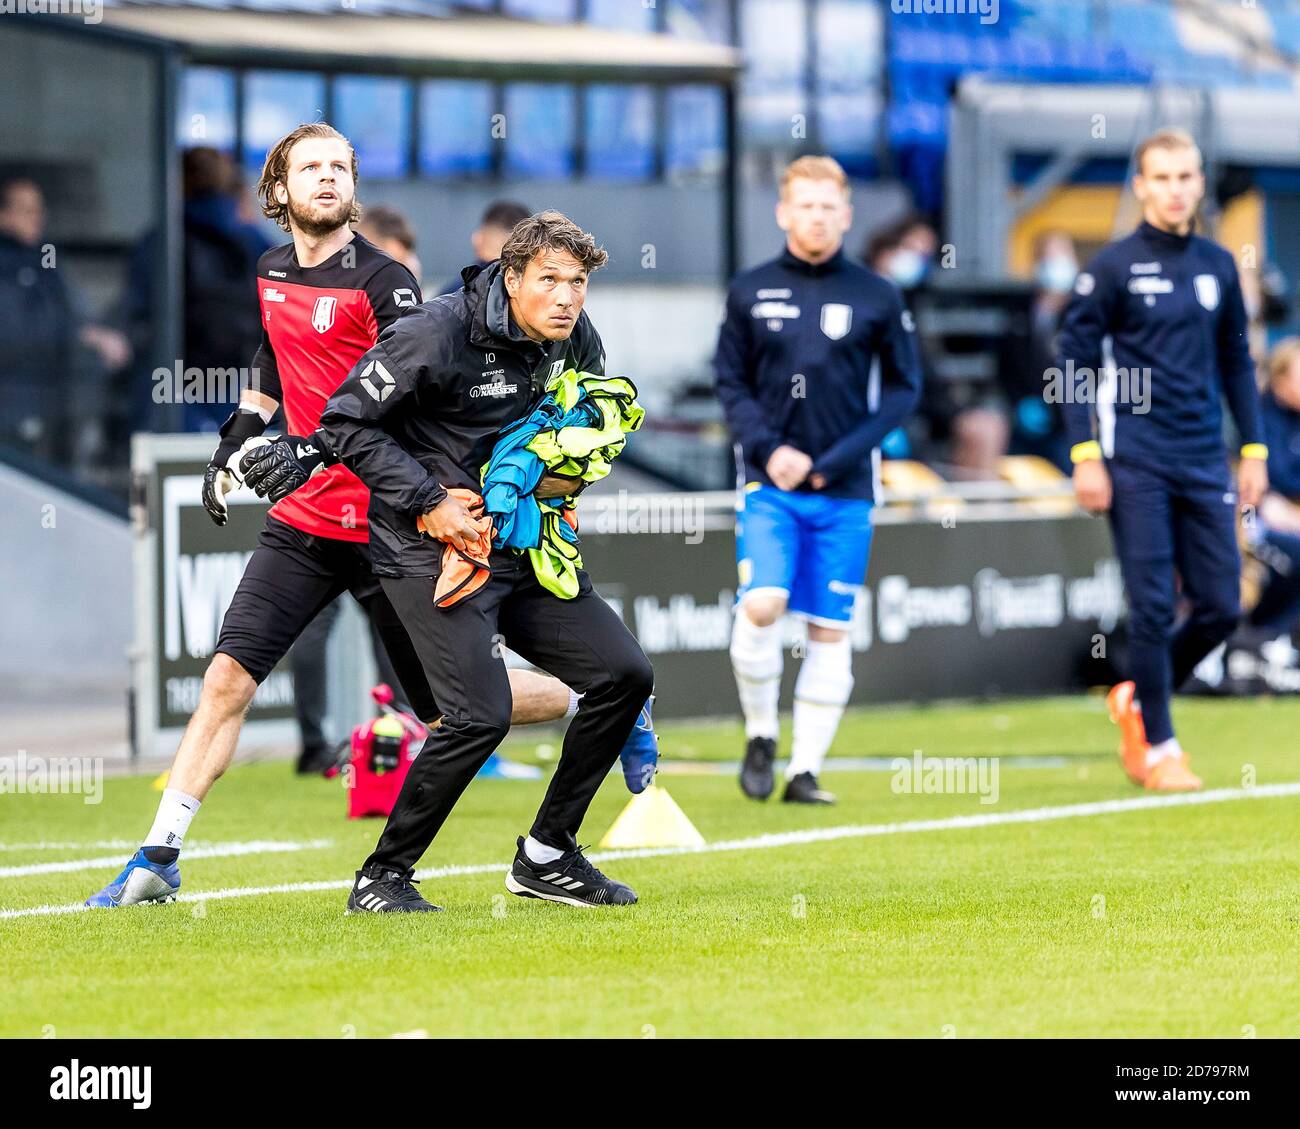 WAALWIJK - 21-10-2020, Mandemakers stadion. Dutch eredivisie, season 2020-2021. Assistant trainer Justin Oost ducking for a ball during the match RKC - PEC. Credit: Pro Shots/Alamy Live News Stock Photo